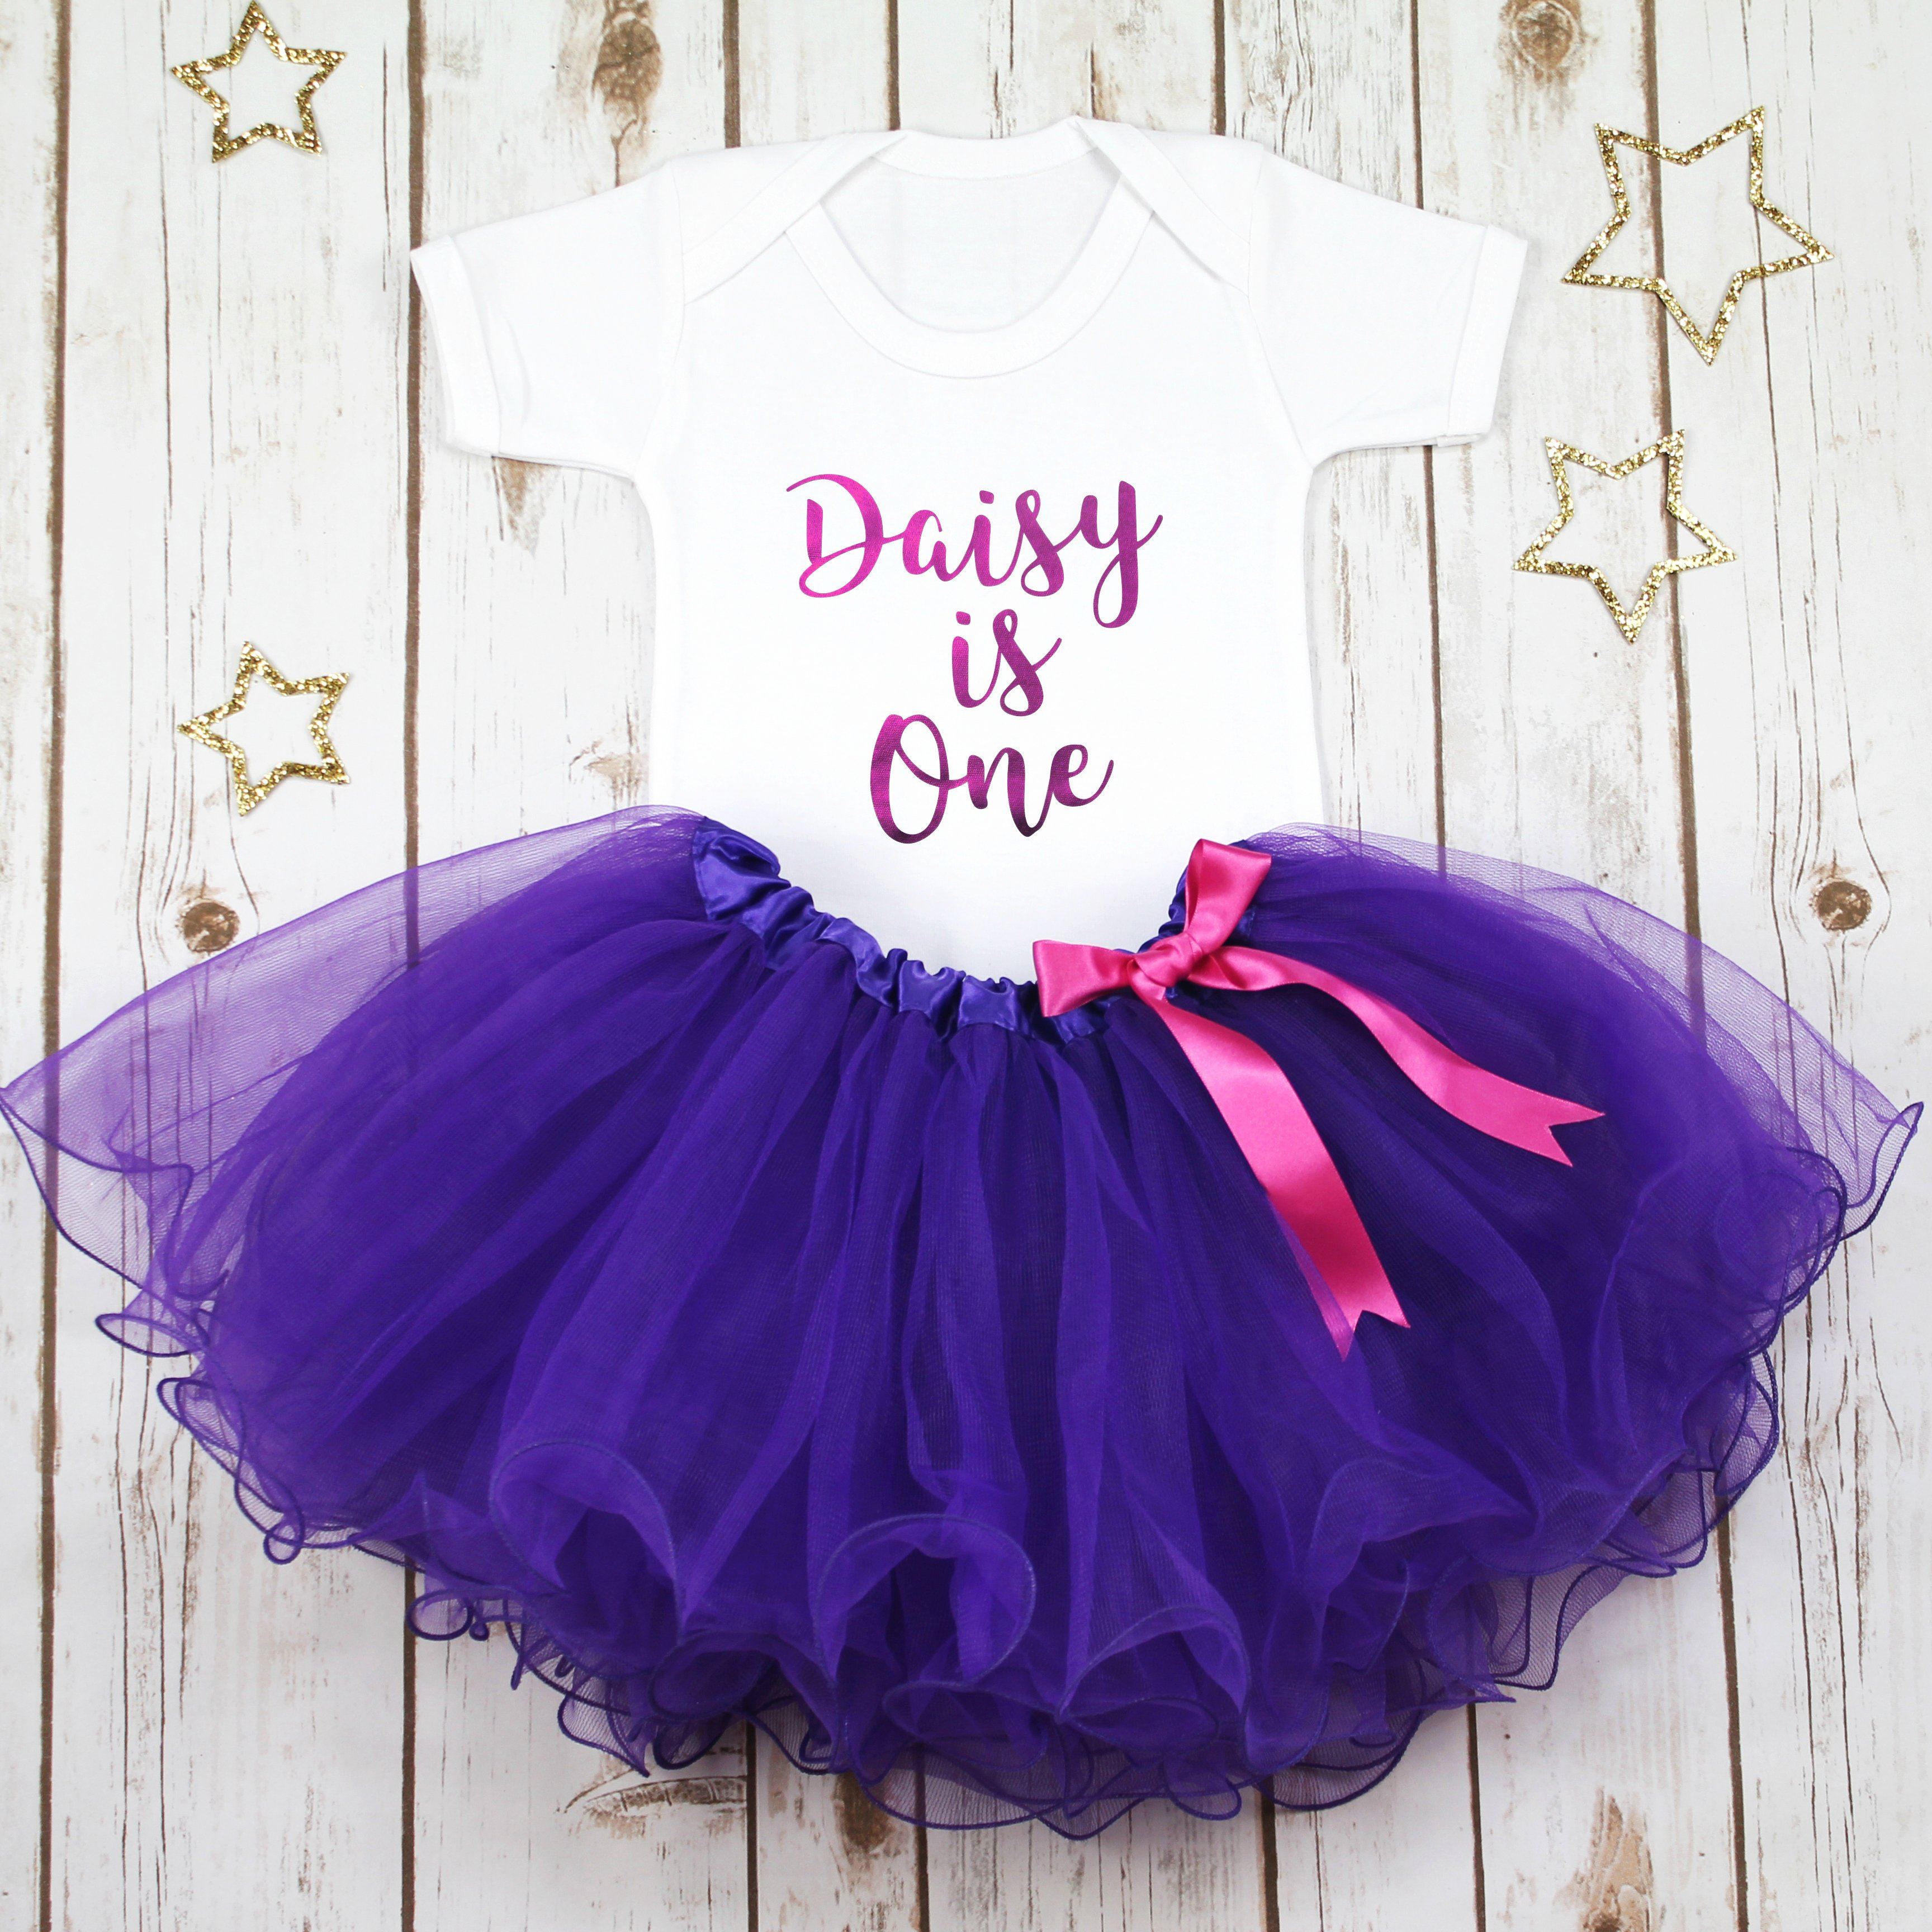 1st bday tutu outfits